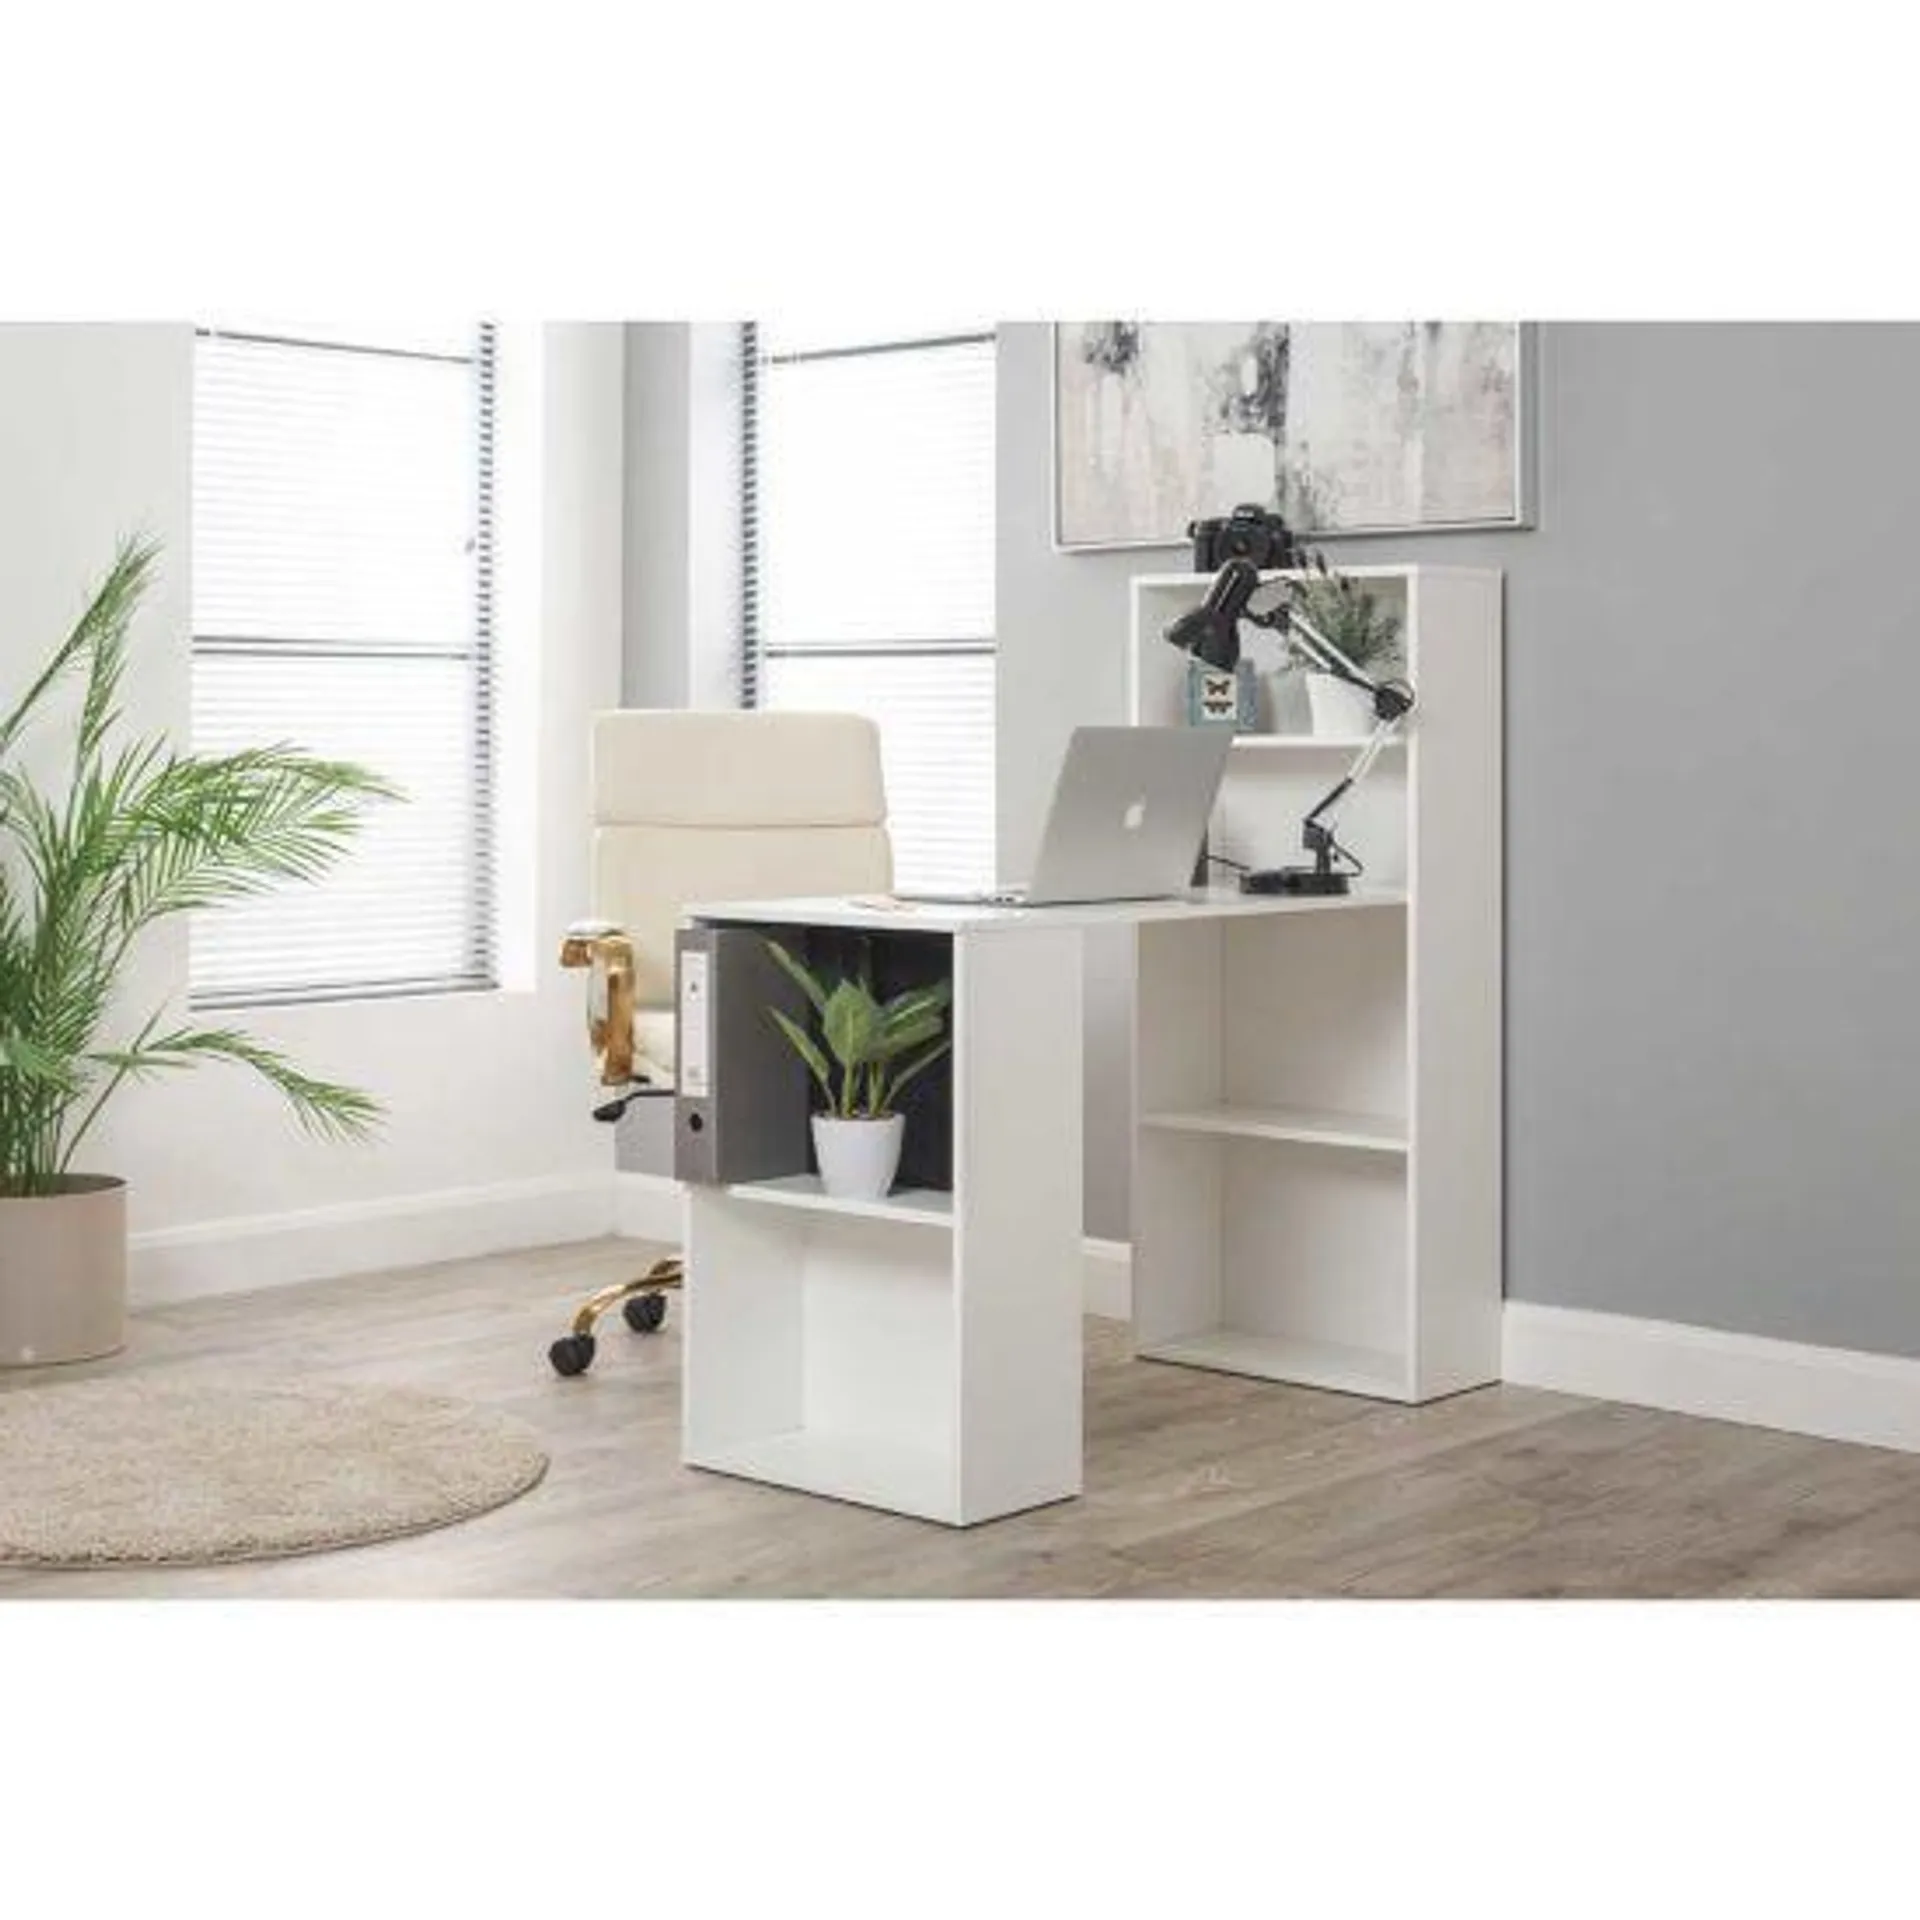 Whitby Desk With Shelves in White